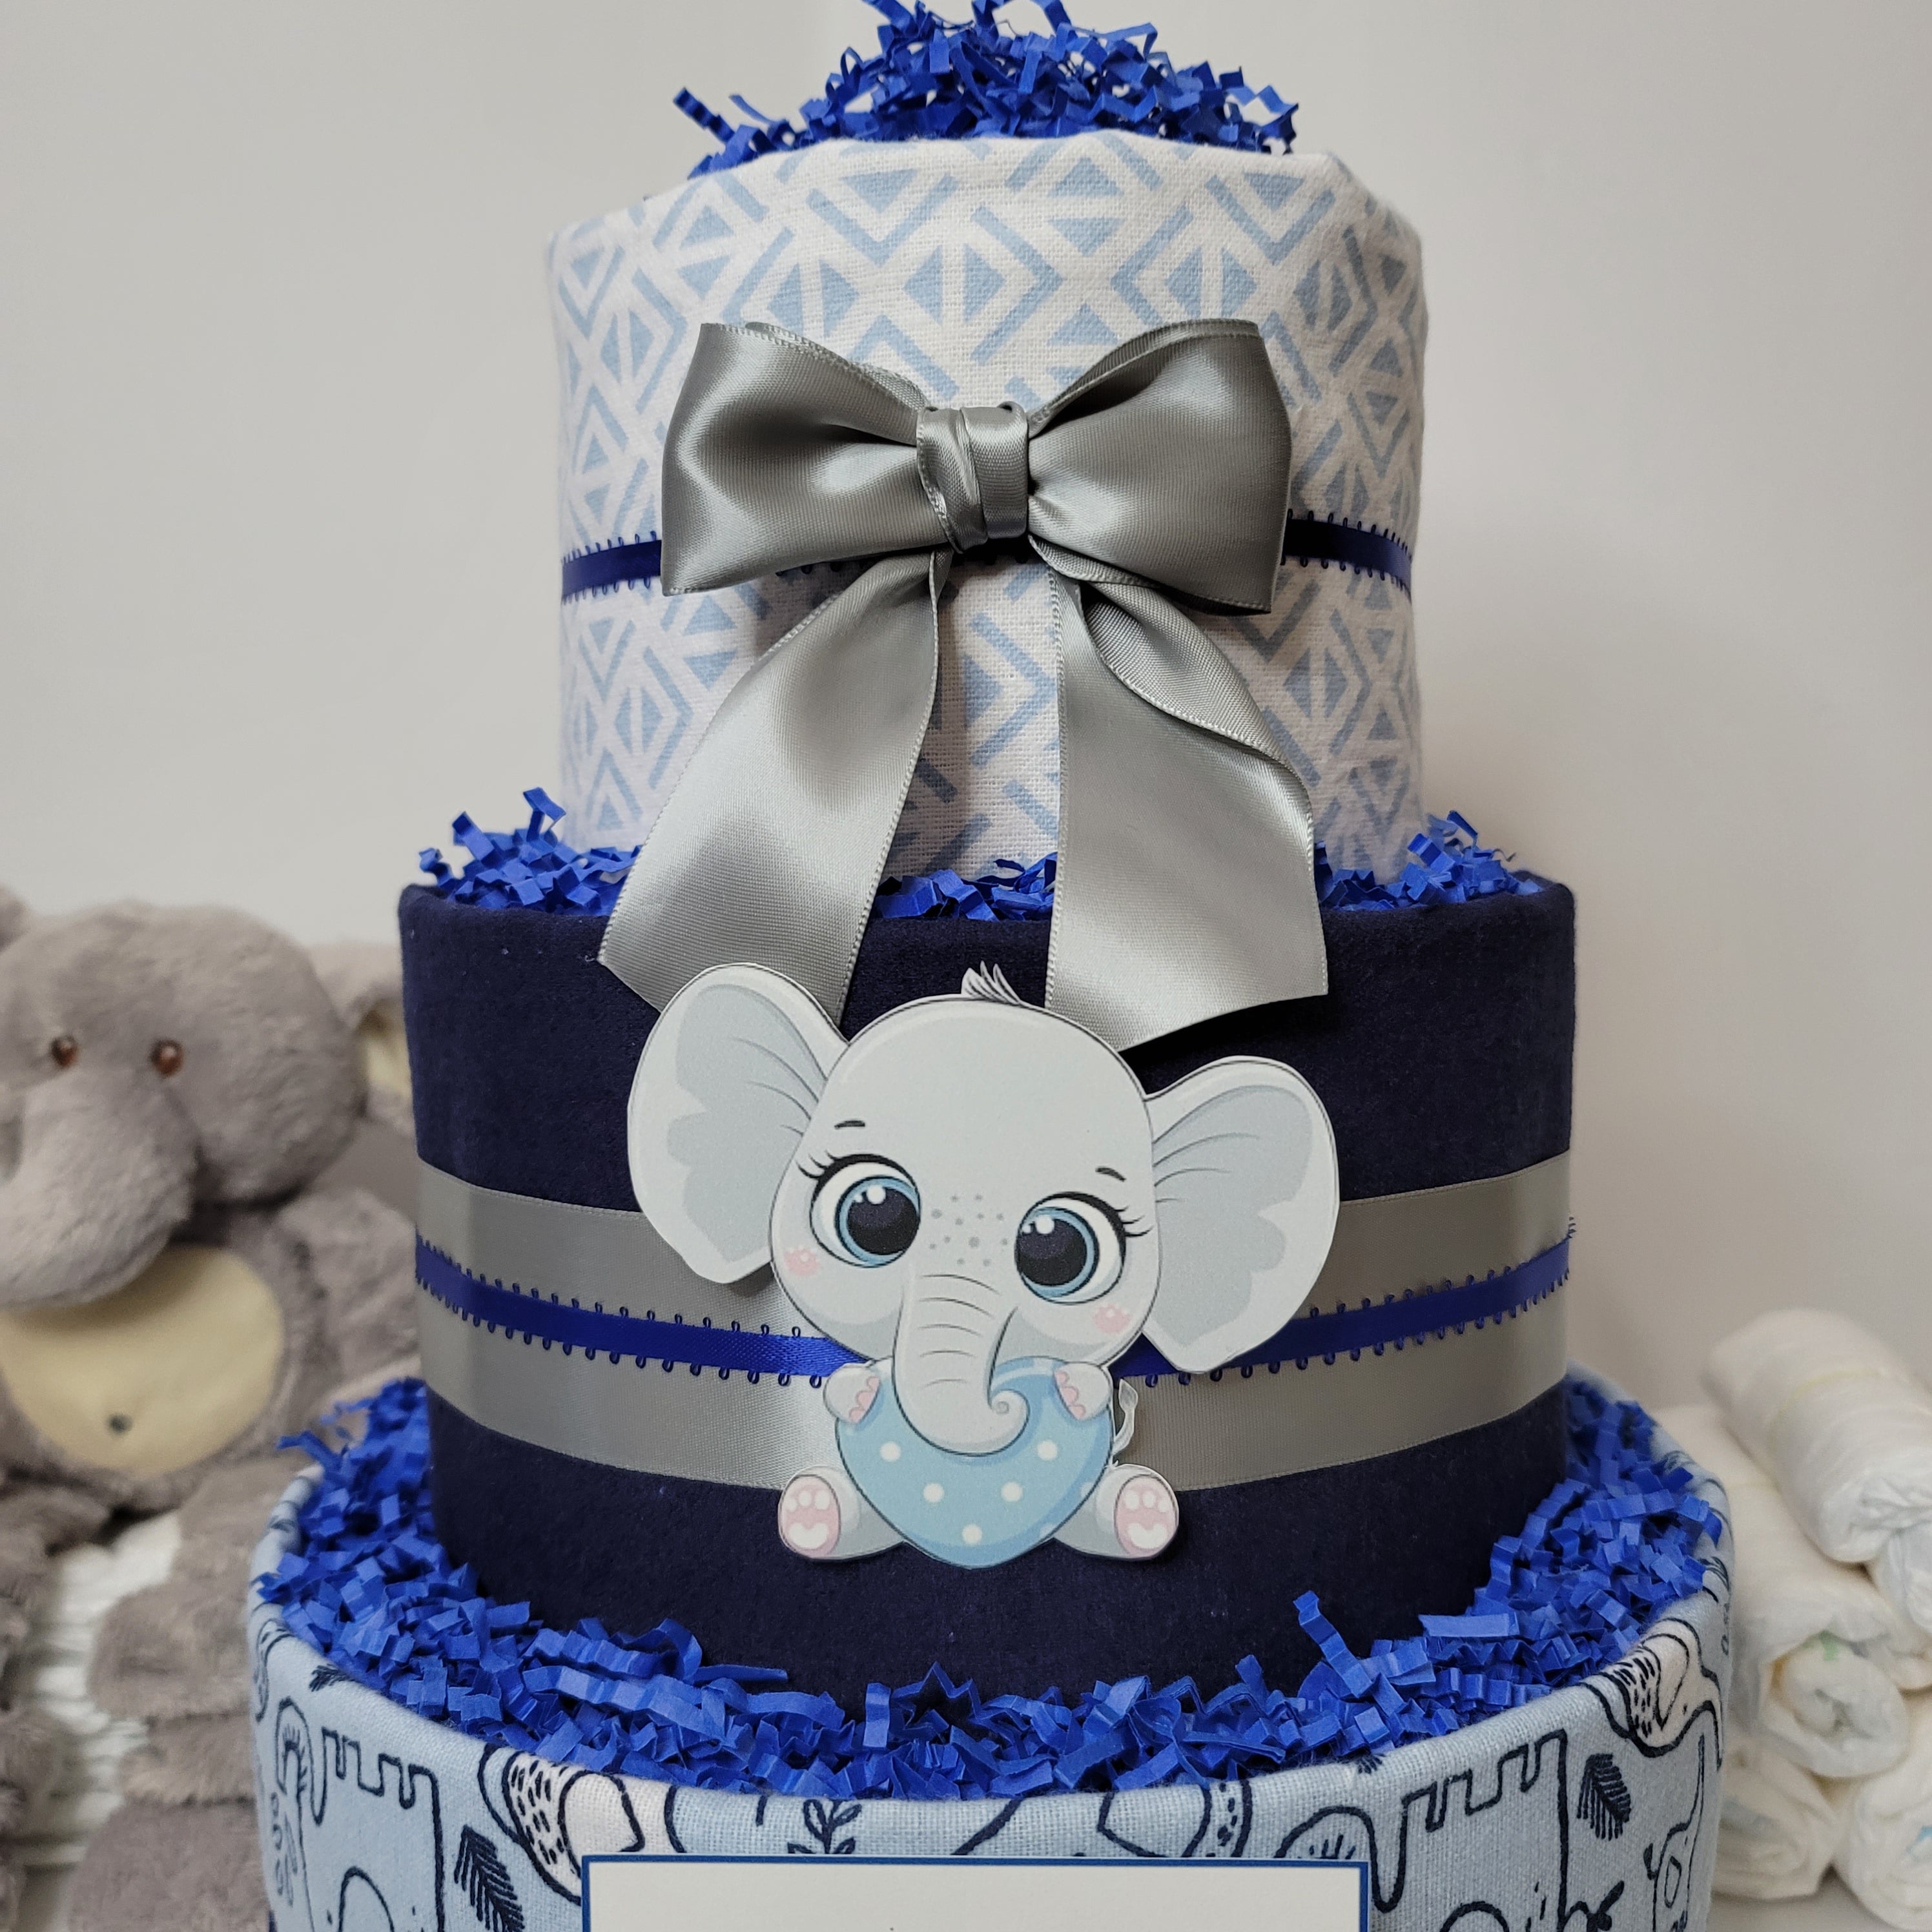 He or She Baby Shower Theme Fondant Cake Delivery in Delhi NCR - ₹2,999.00  Cake Express